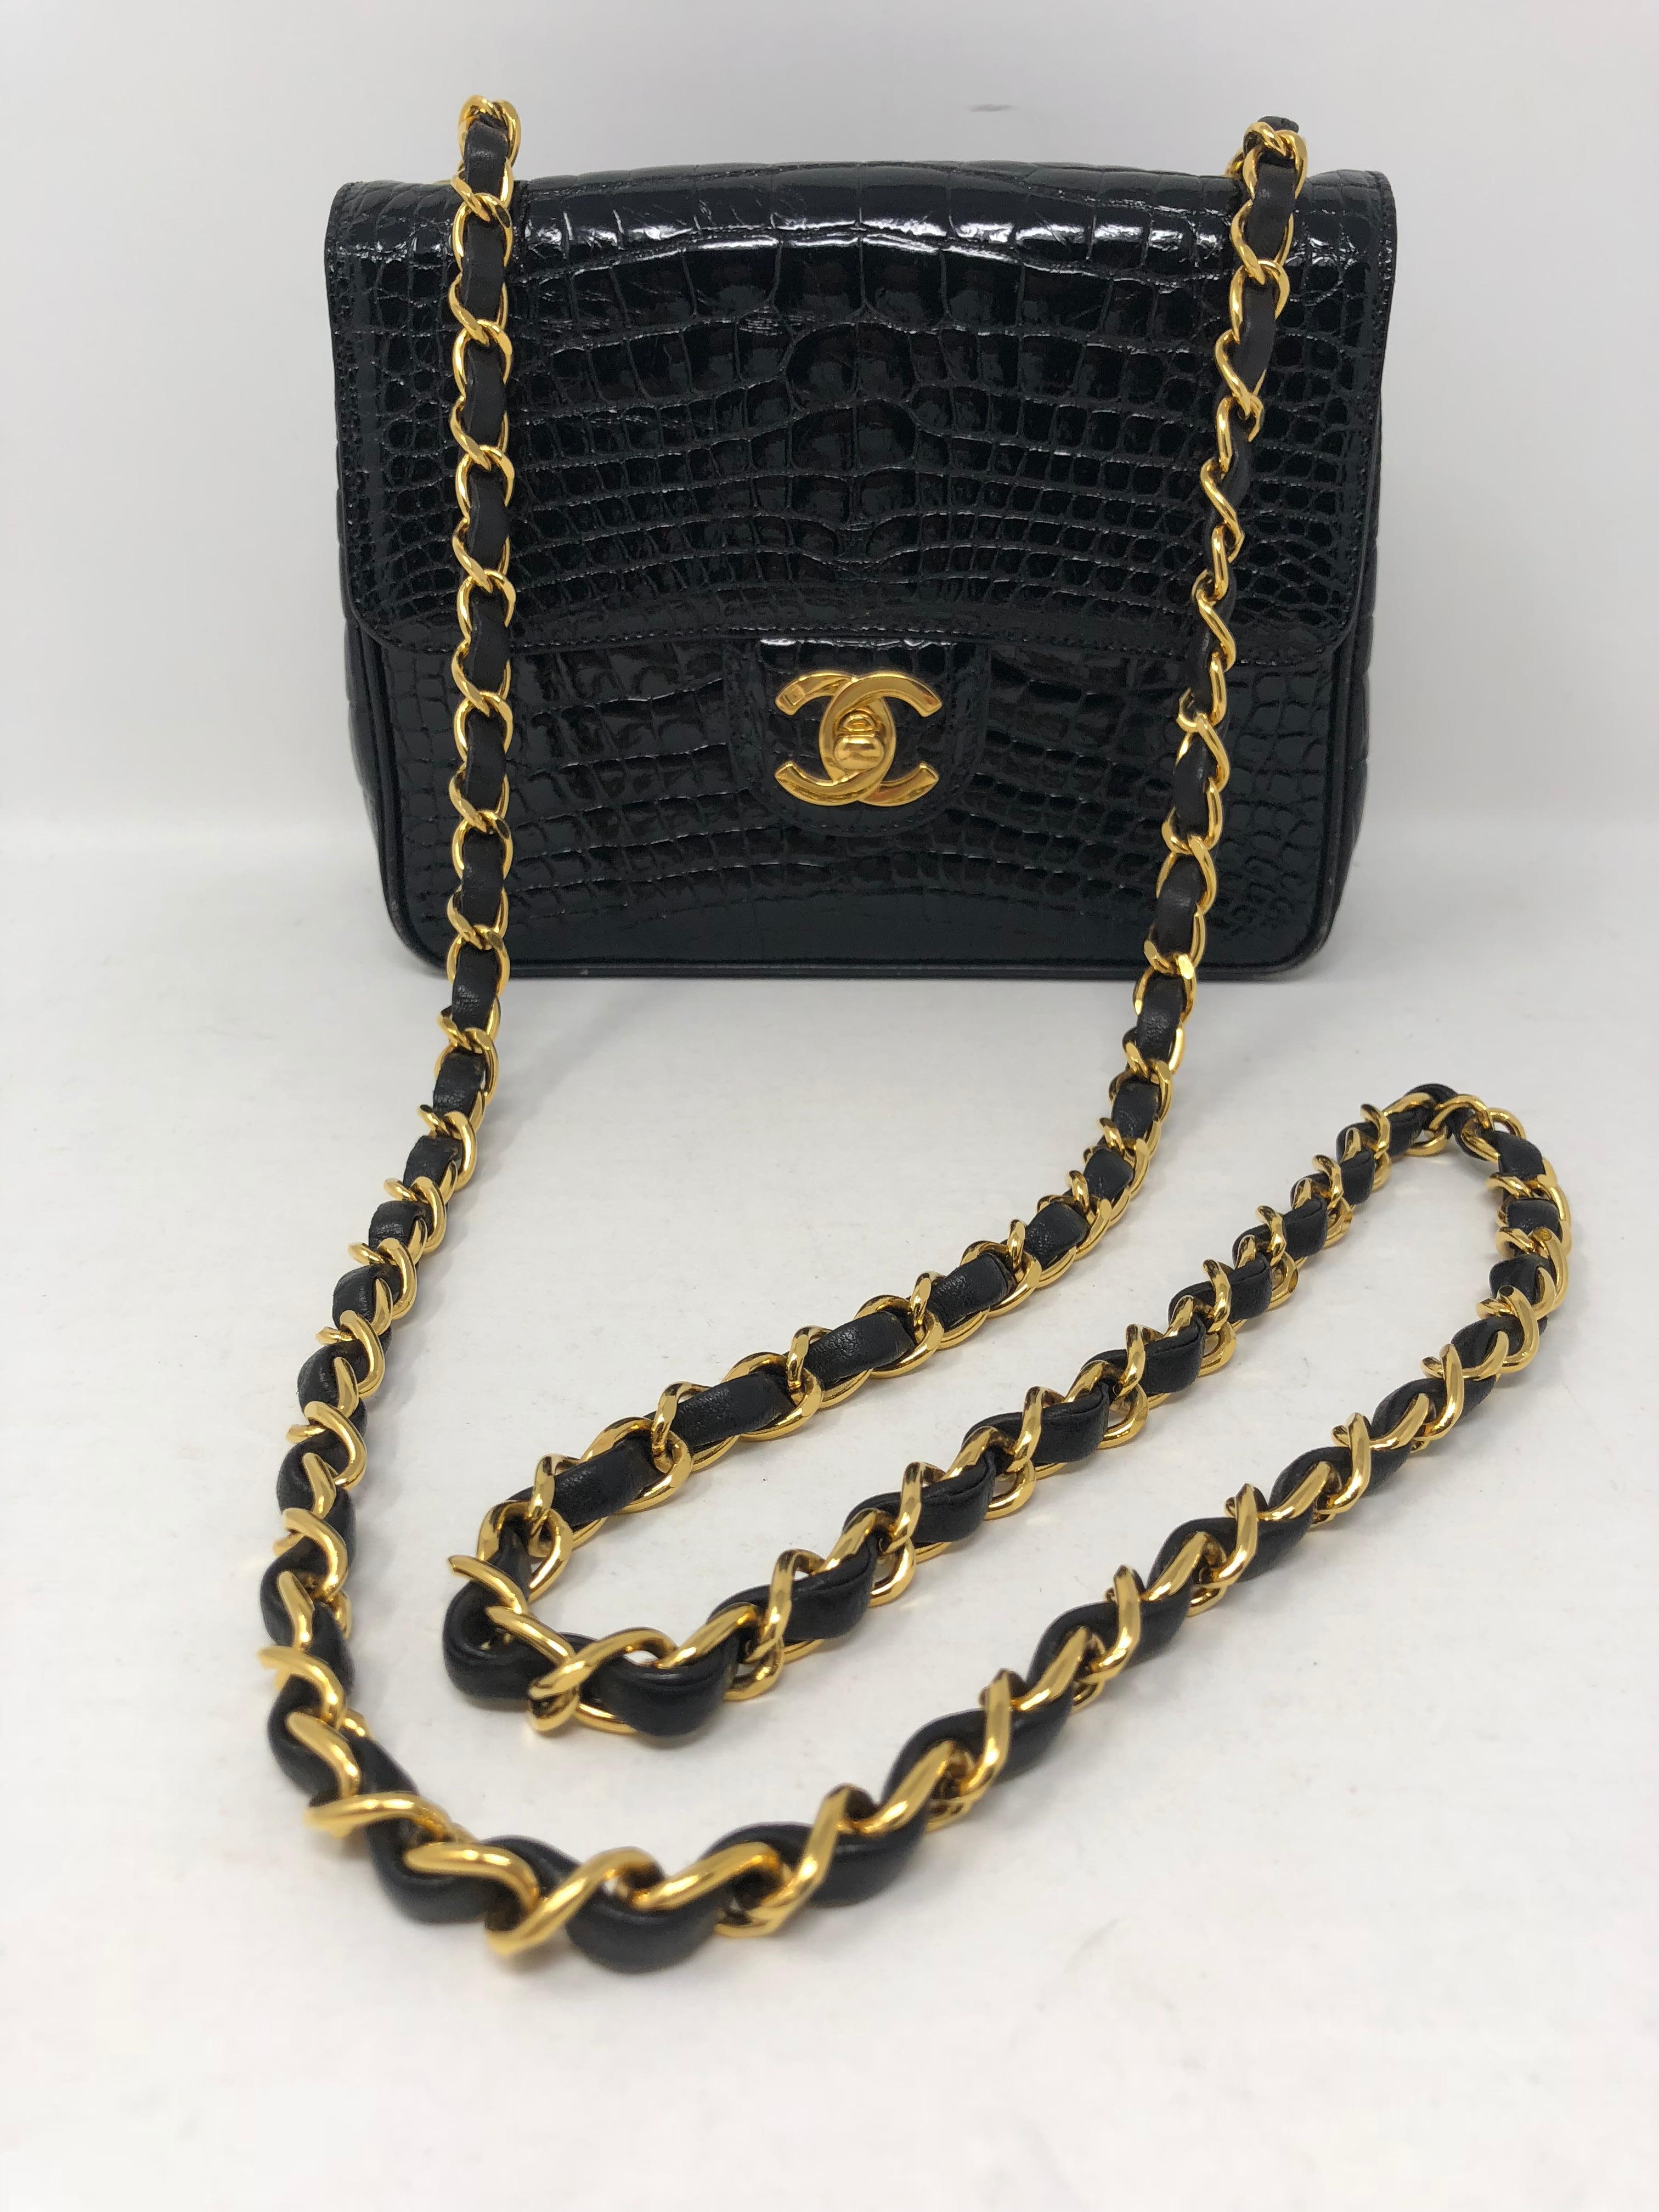 Chanel Crocodile Bag in Black and in gold hardware. Rare mini size and highly coveted piece. Due to the skins it is a Collector's piece. In excellent condition only slight wear on the corners that can be refurbished easily. Beautiful sheen from the